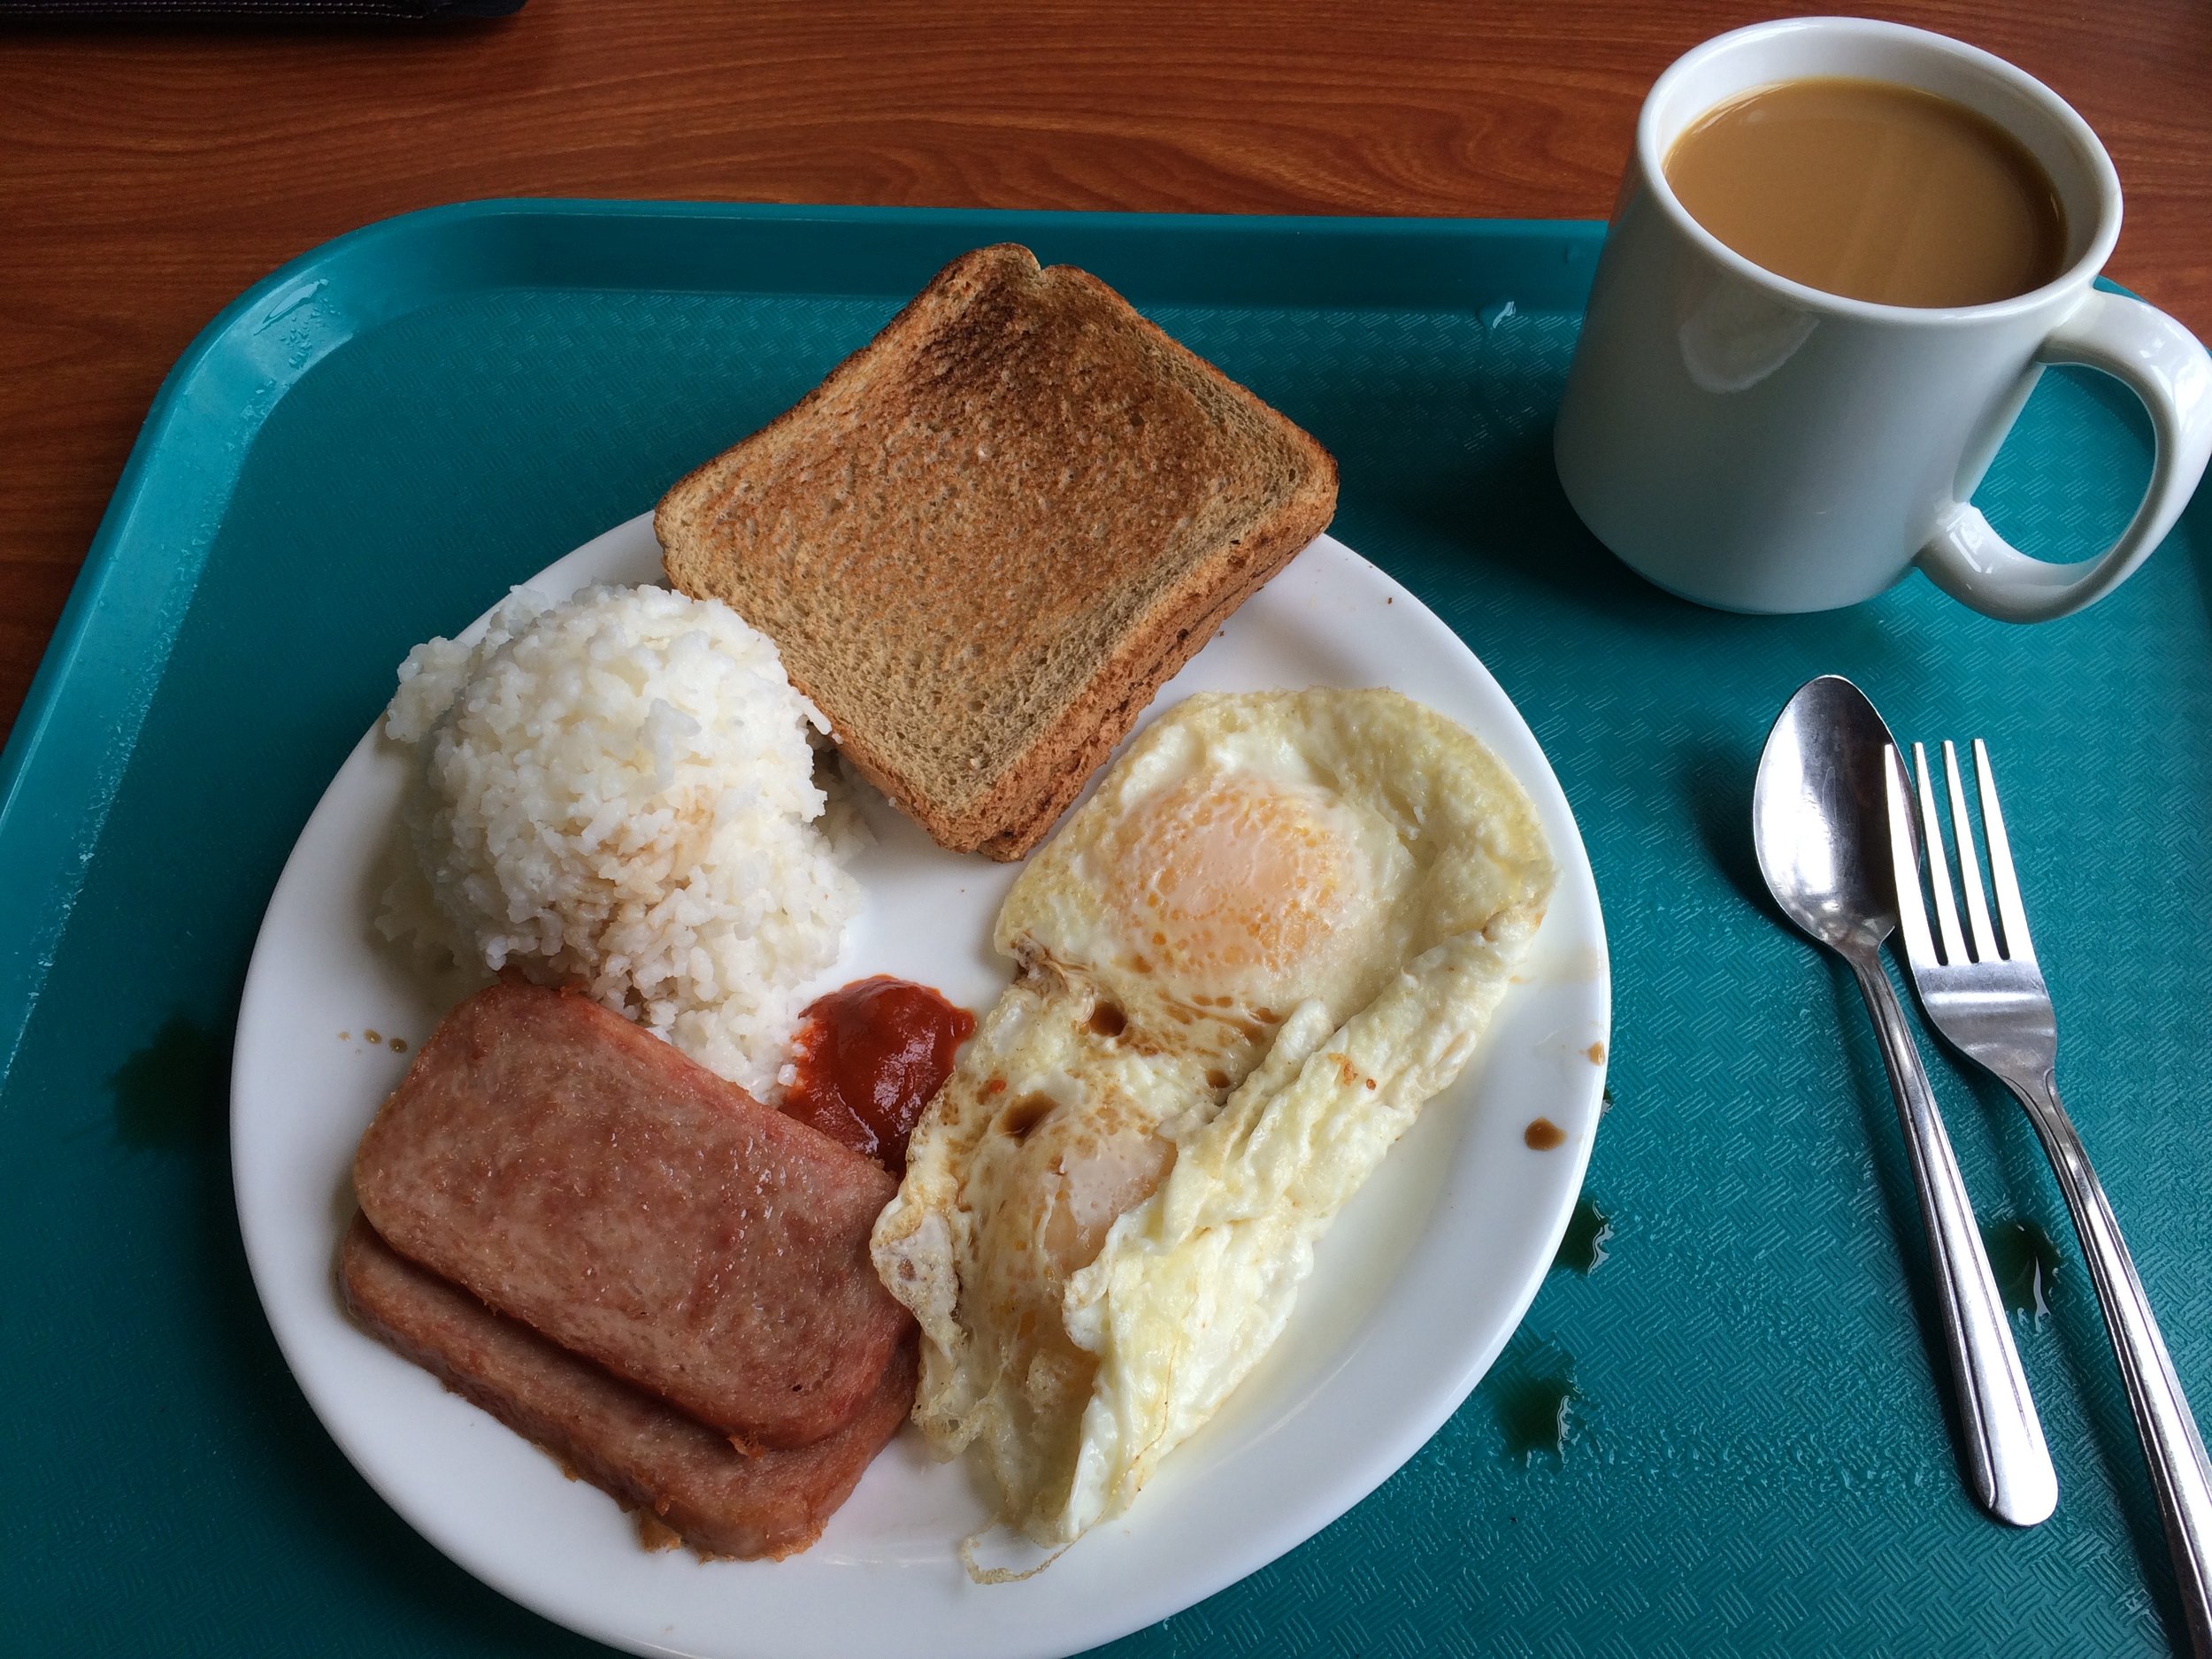 The most perfect breakfast ever - Kilauea Military Camp